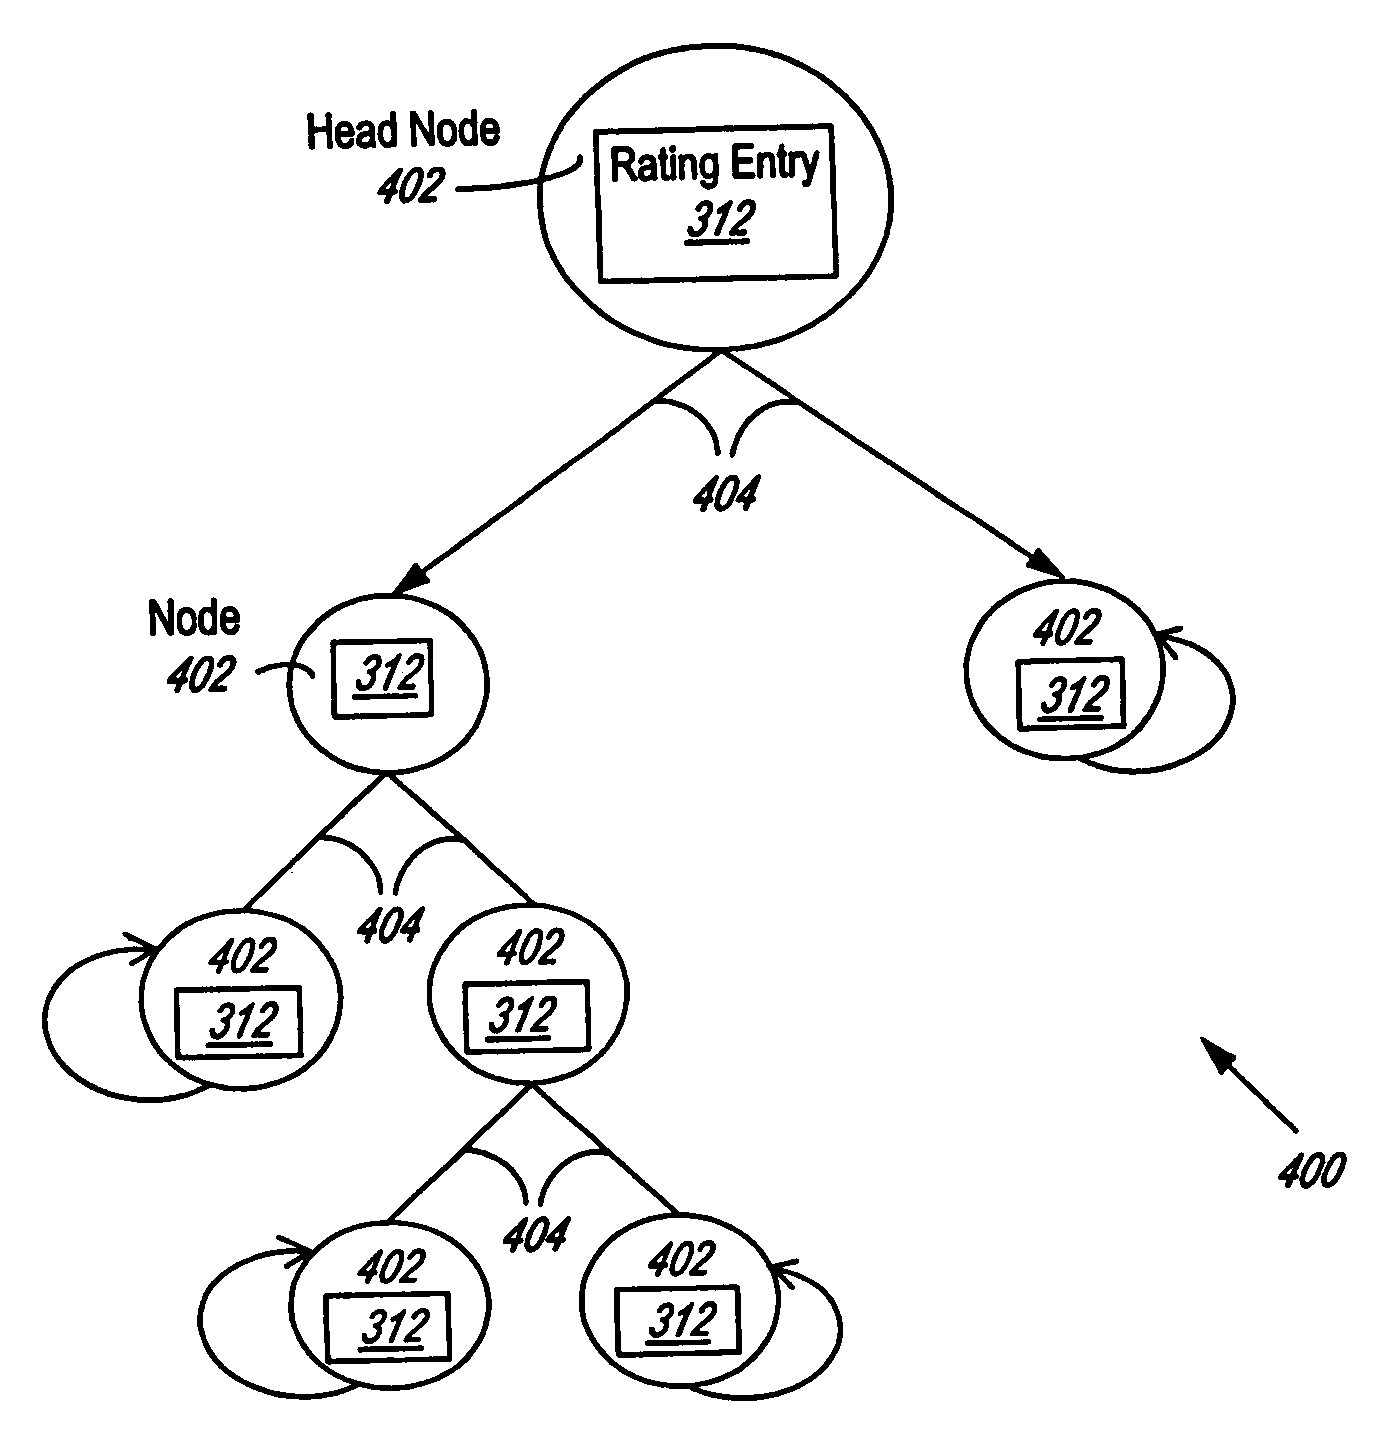 System and method of downloading configuration data from a central location to components for a communication switch